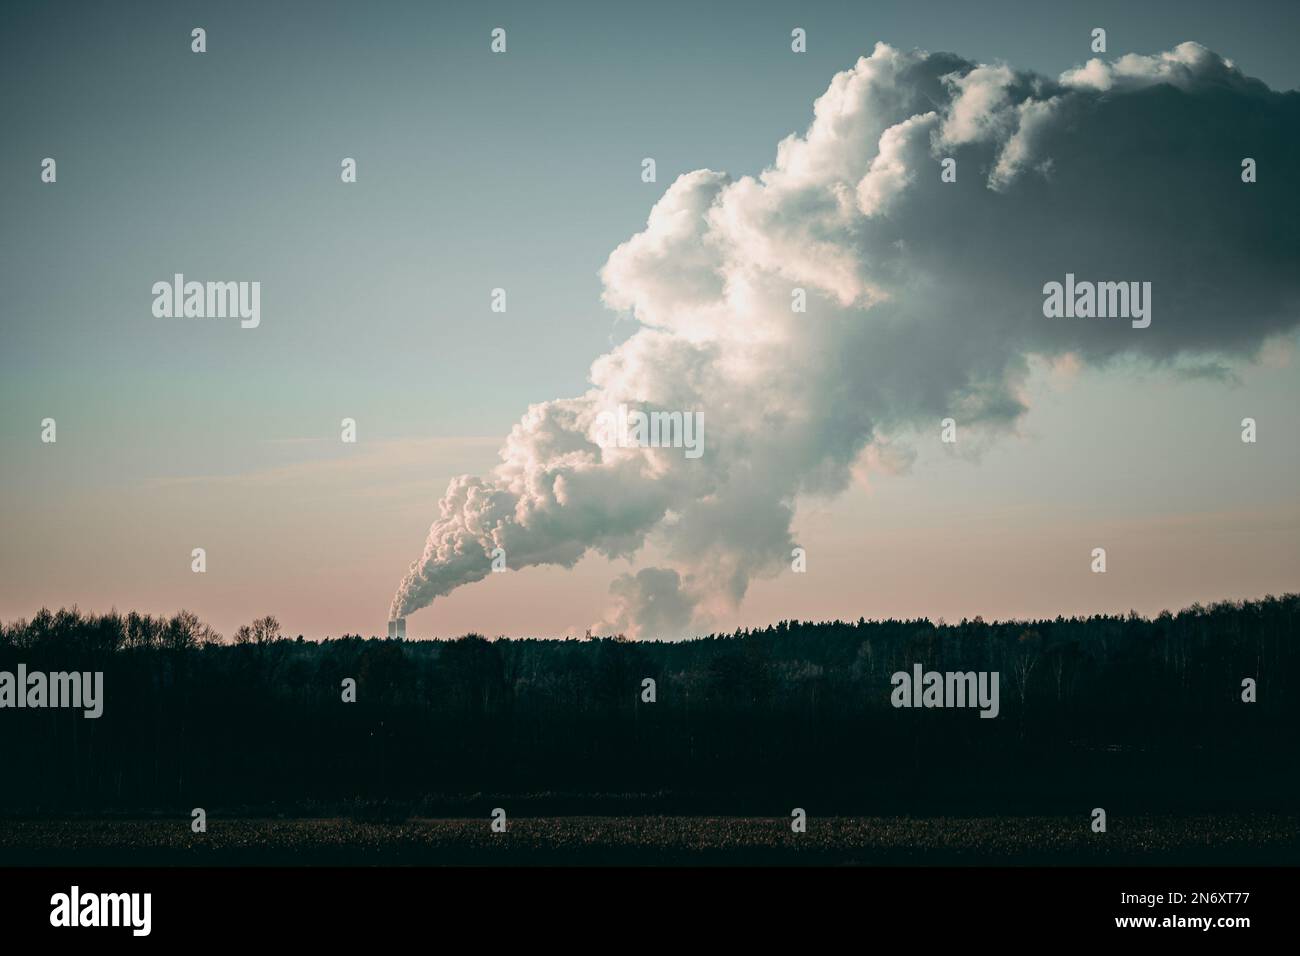 A beautiful shot of smoke coming out of industrial chimneys on a rural valley Stock Photo